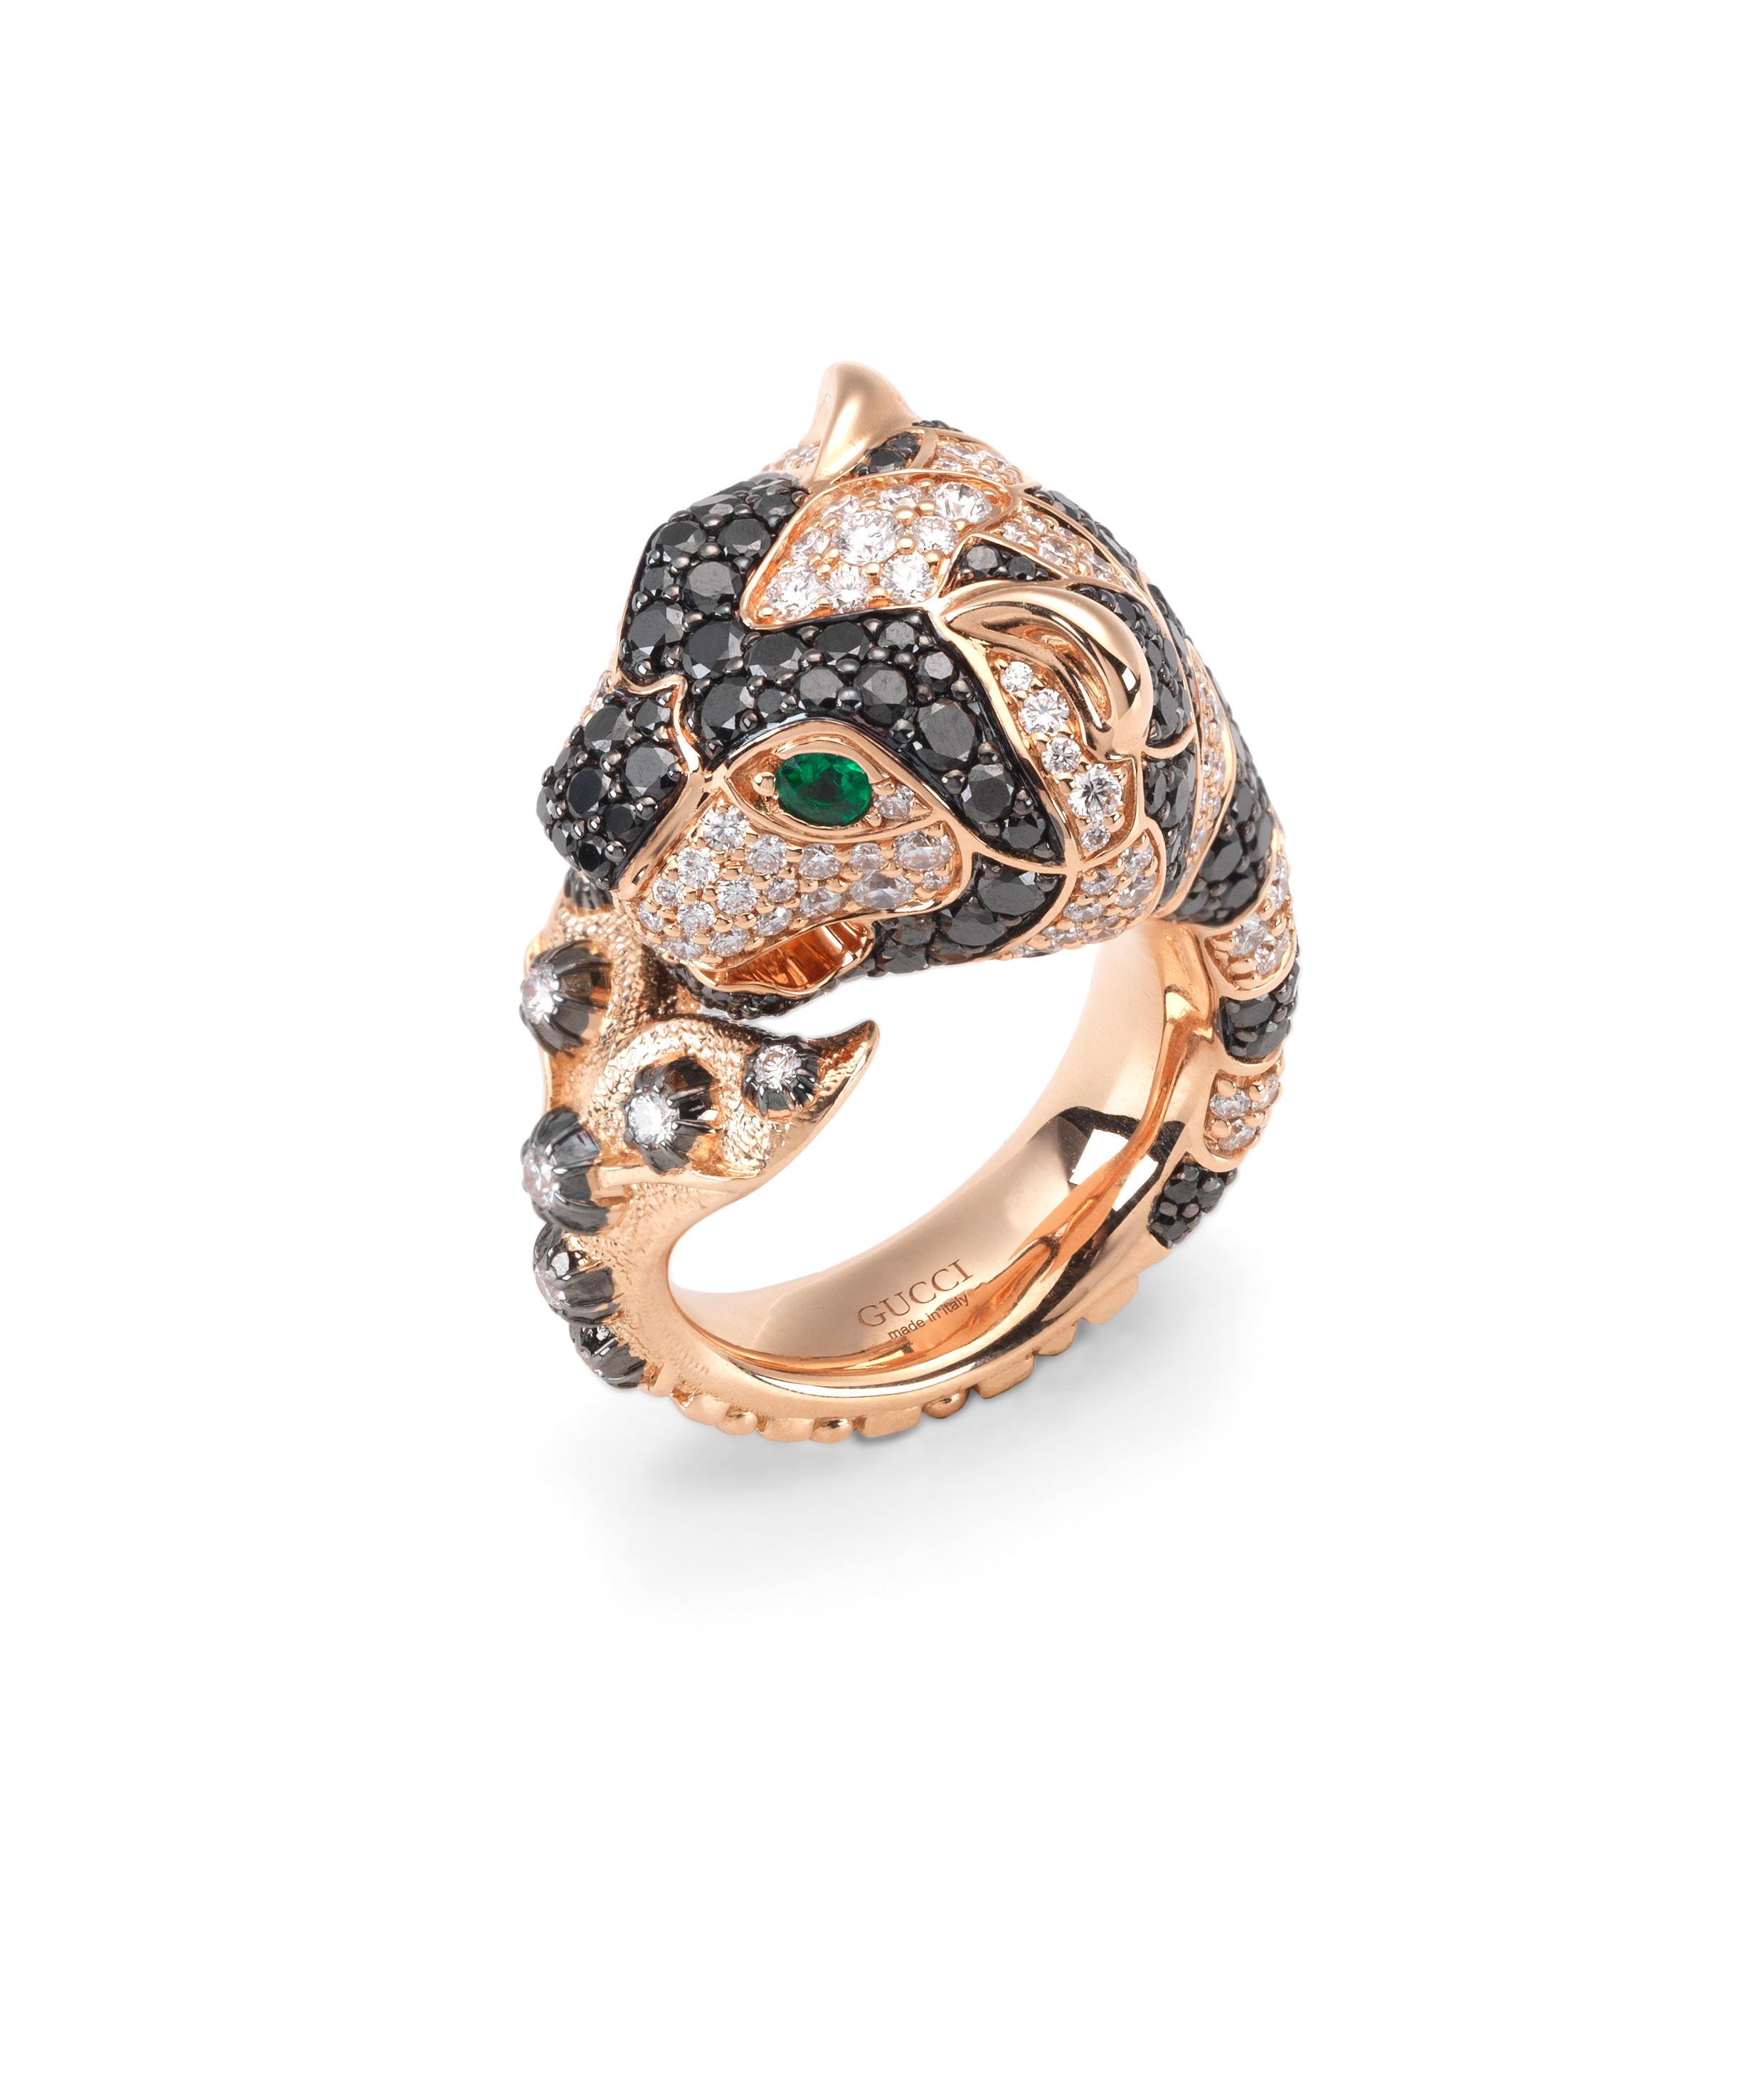 Gucci Siamese Snake Tiger Head Ring | Hypebeast